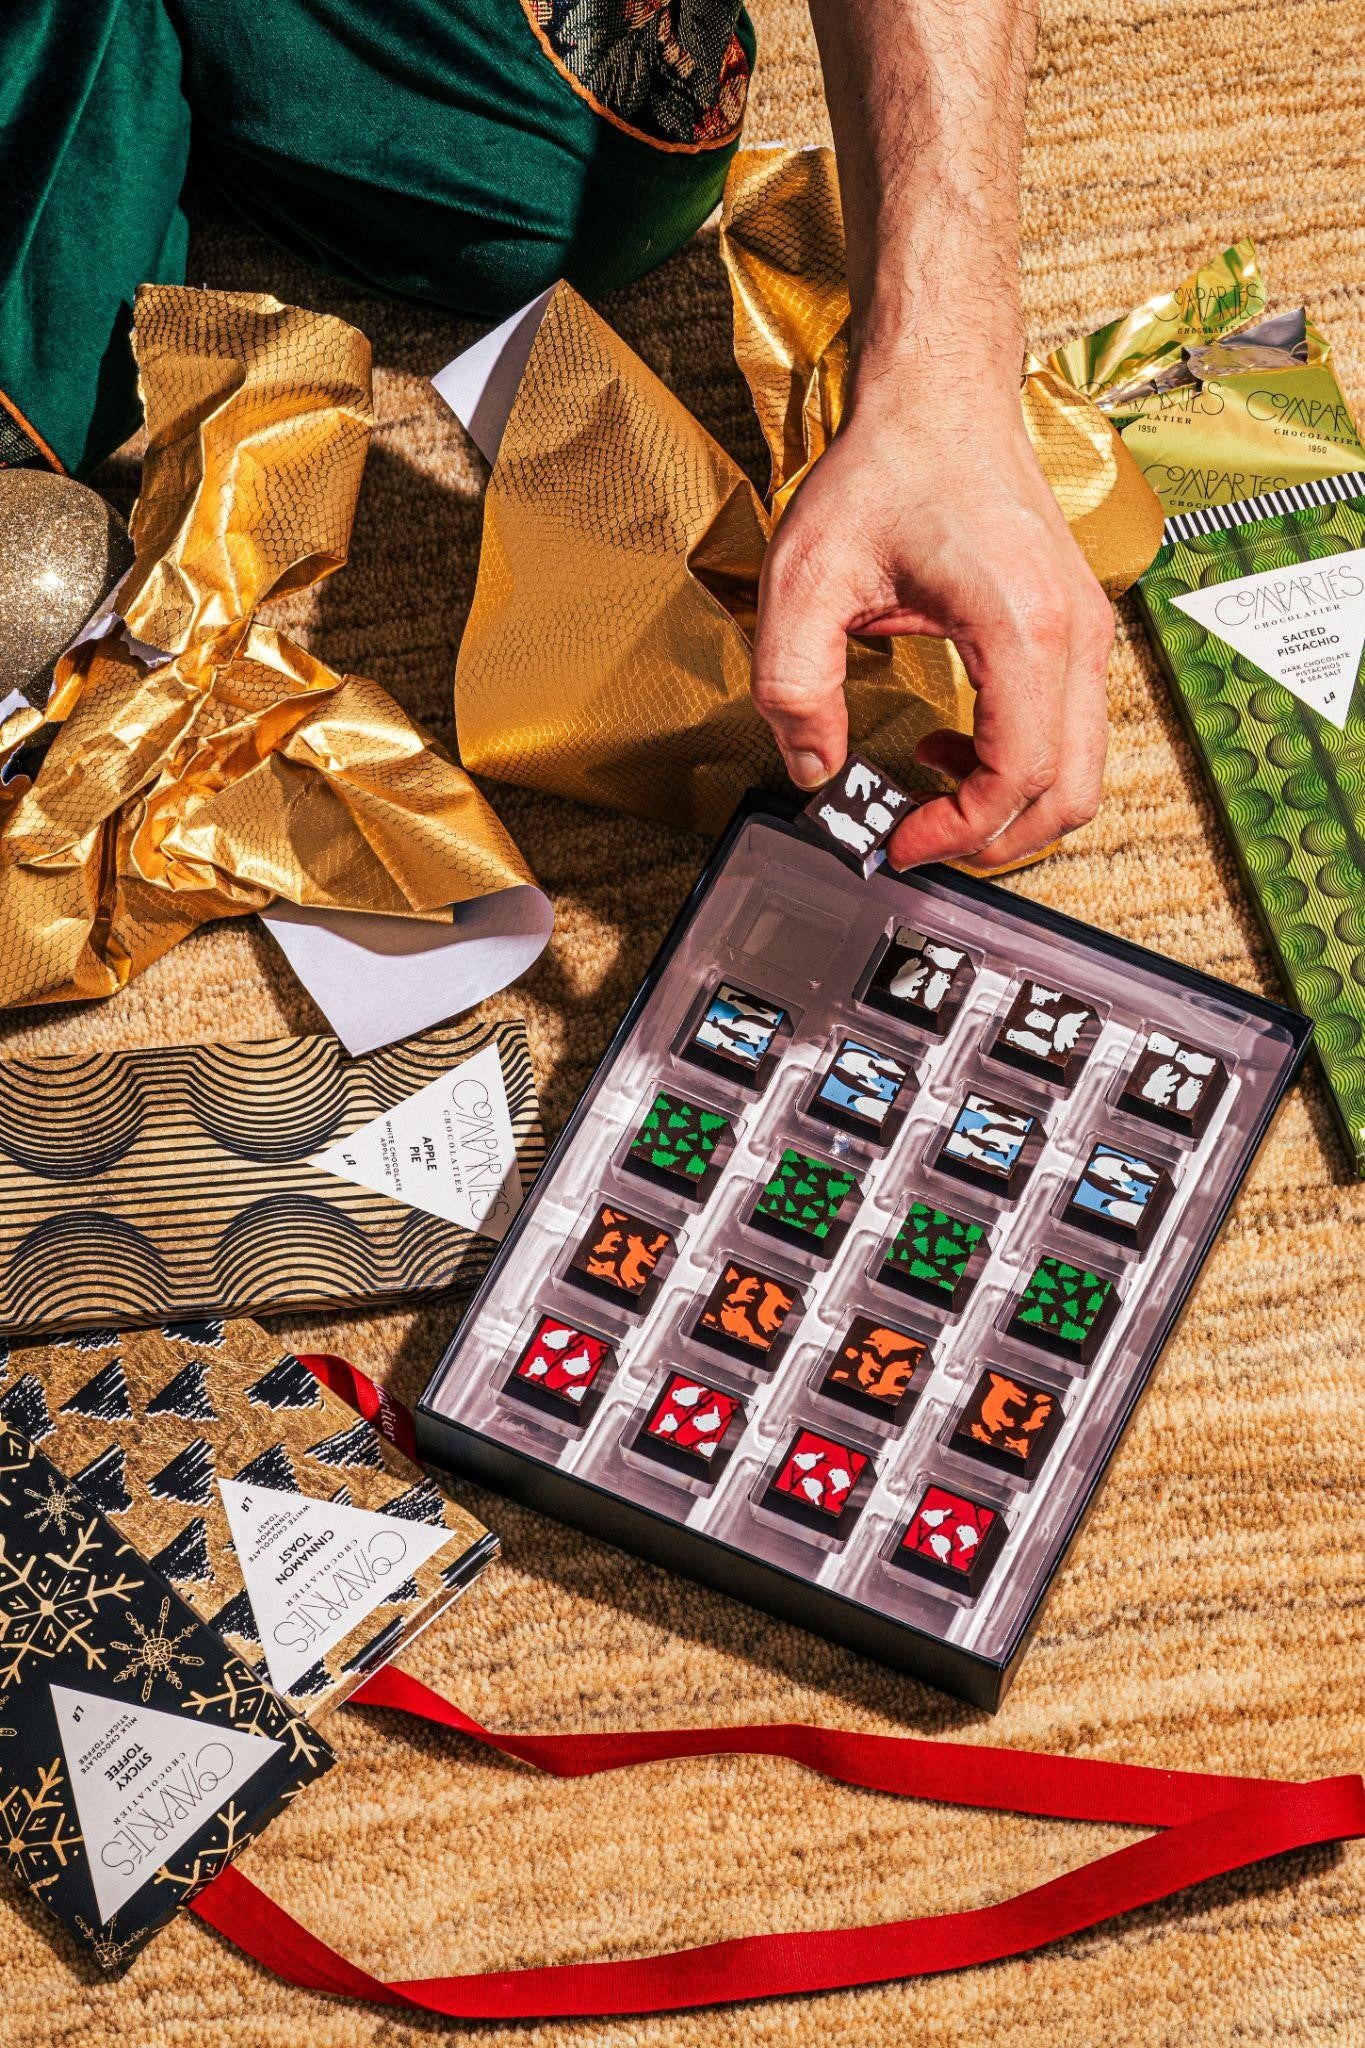 Christmas Chocolates being unwrapped and opened on a floor with Compartes Chocolate bars beside the box